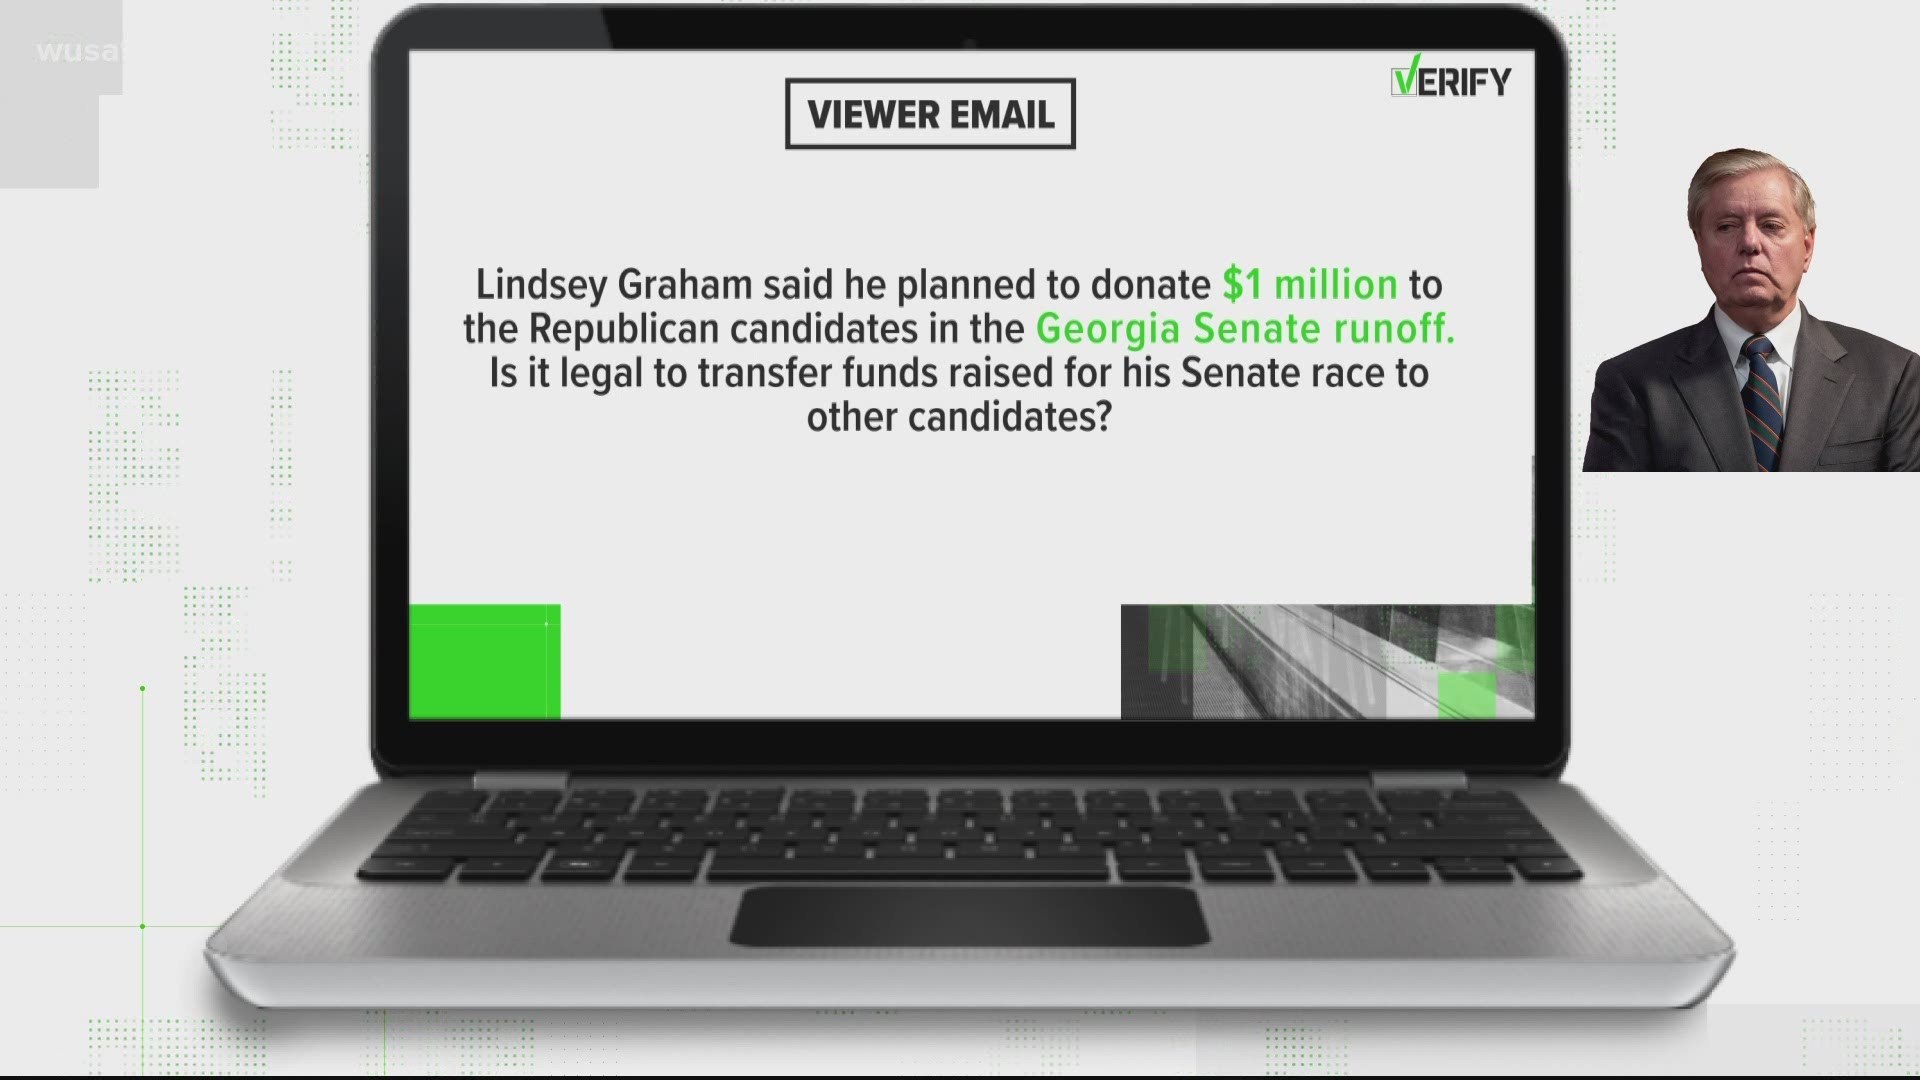 The Verify team looked into whether Lindsey Graham can send money to candidates running in the Georgia Senate race.